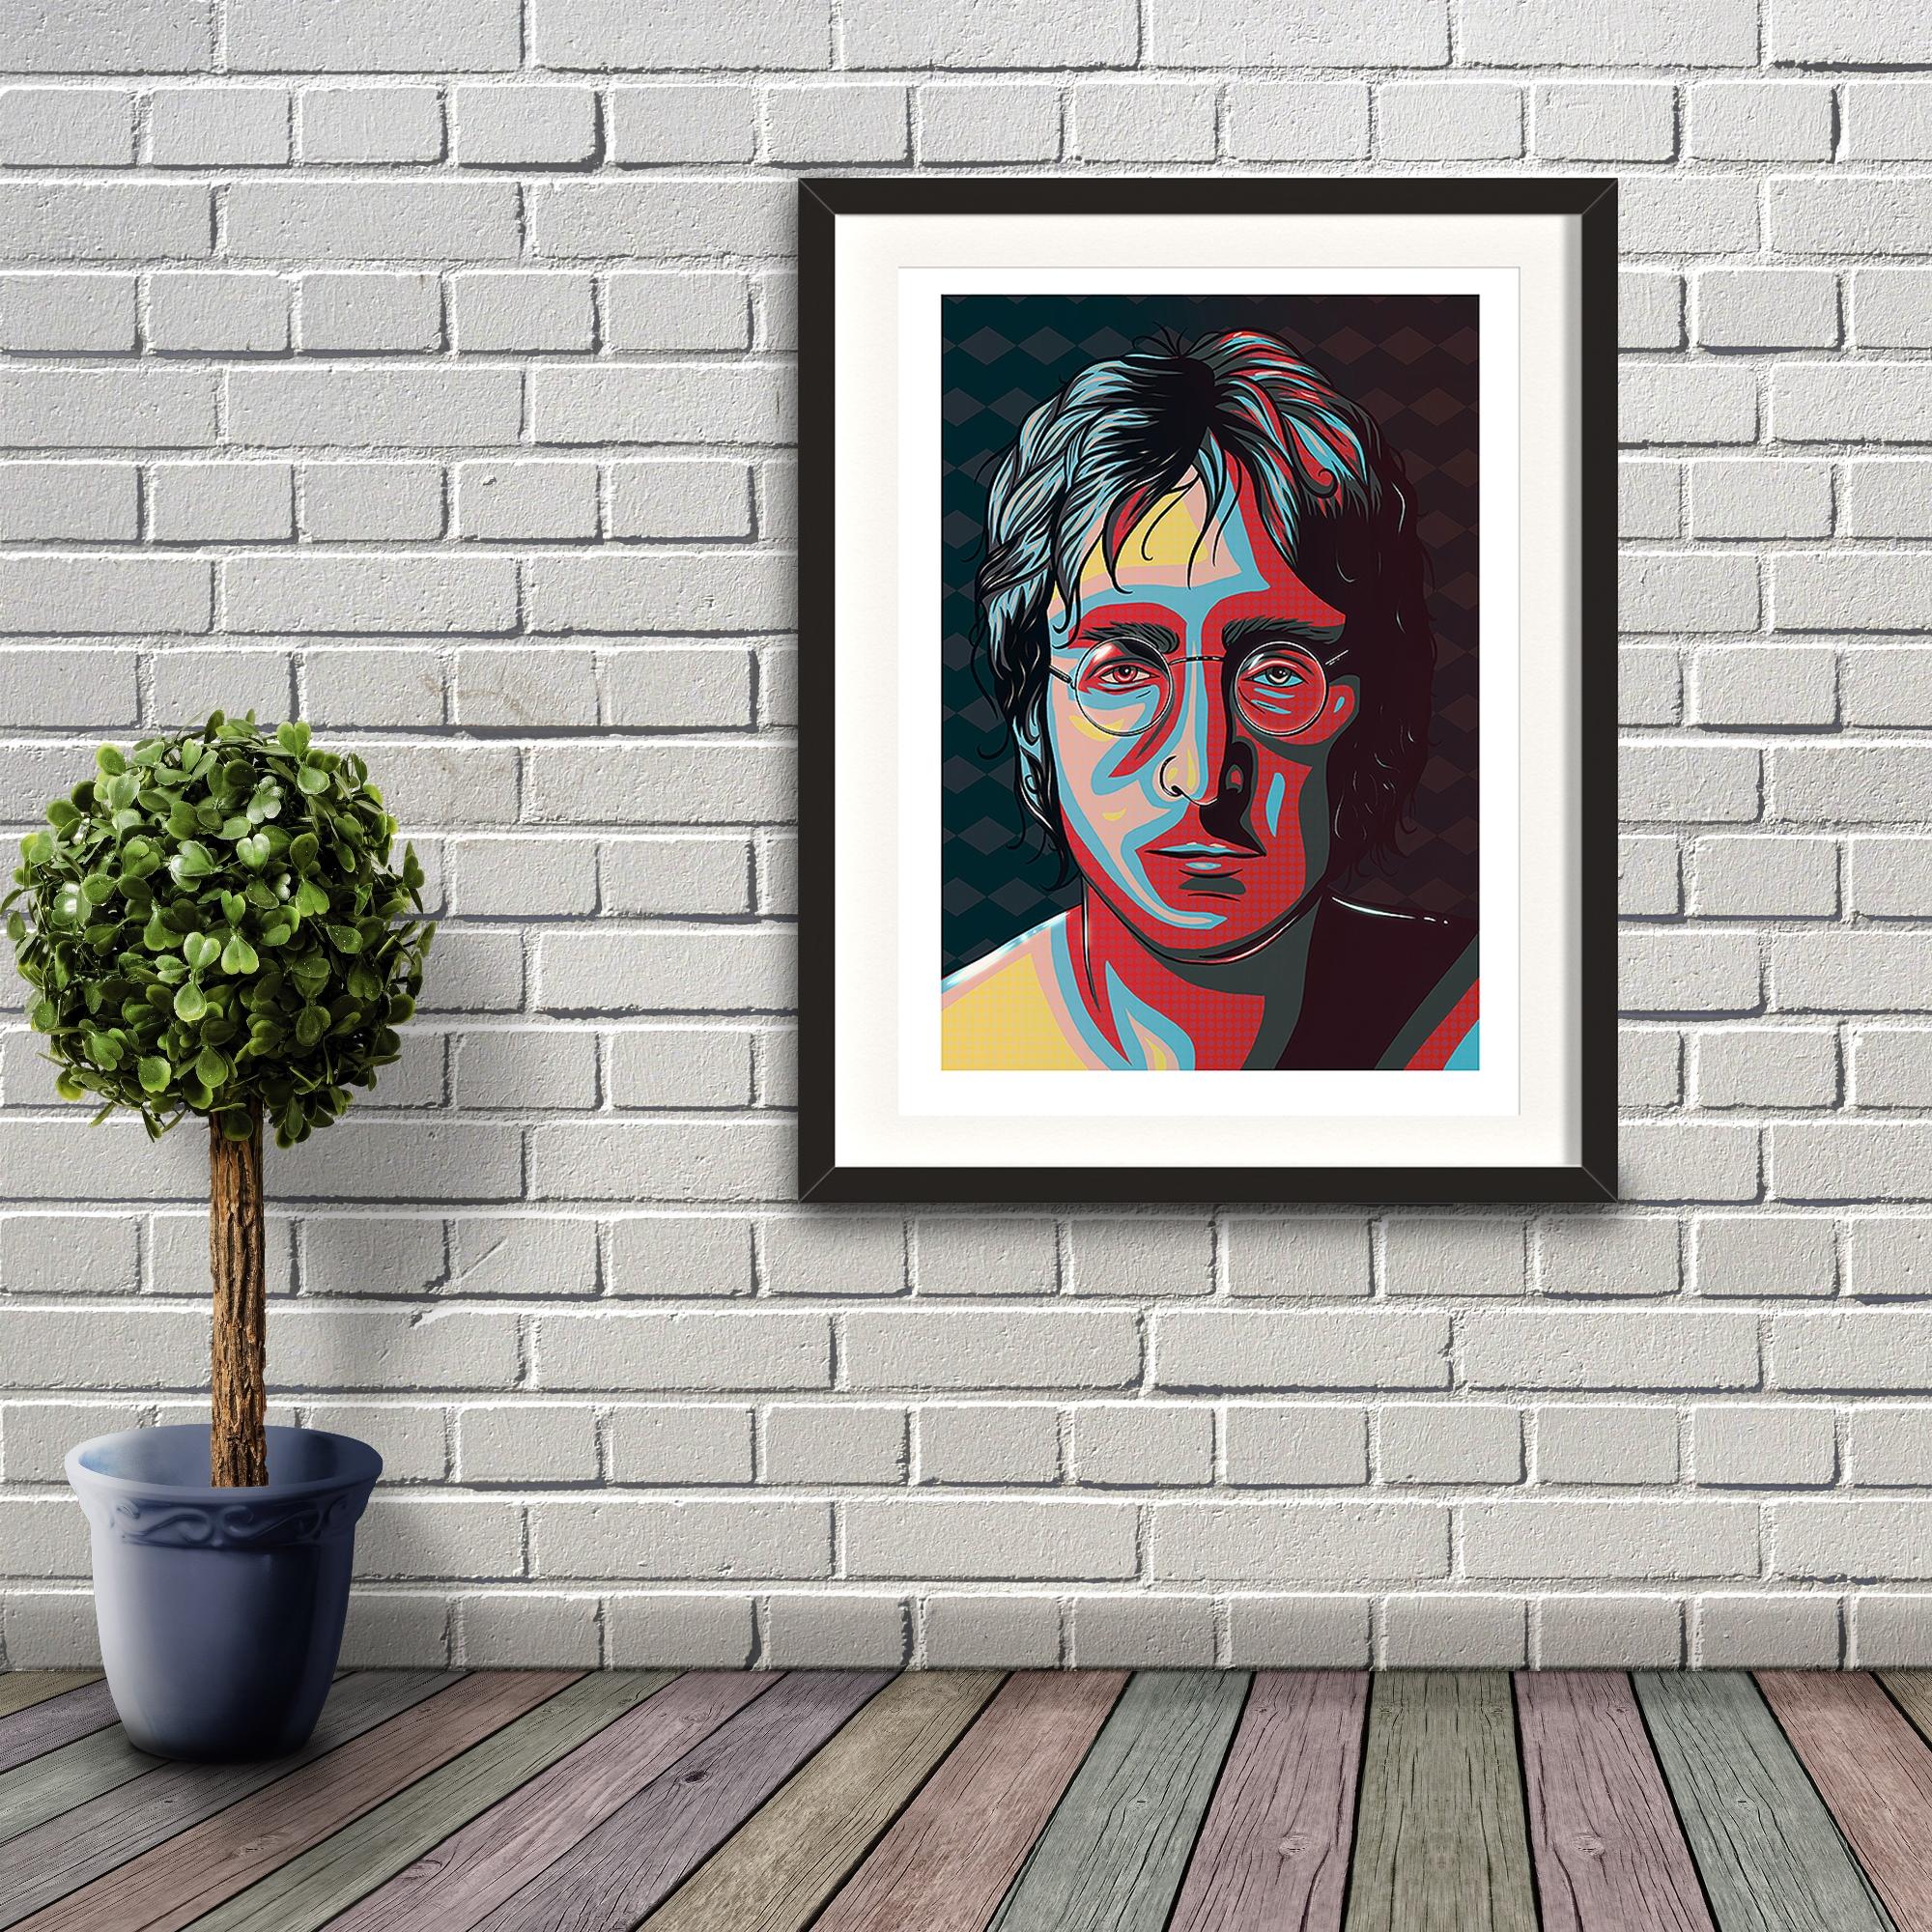 A digital painting in the form of pop art by Lily Bourne of John Lennon from the 1960s. Red, yellow, blue and black in colour.